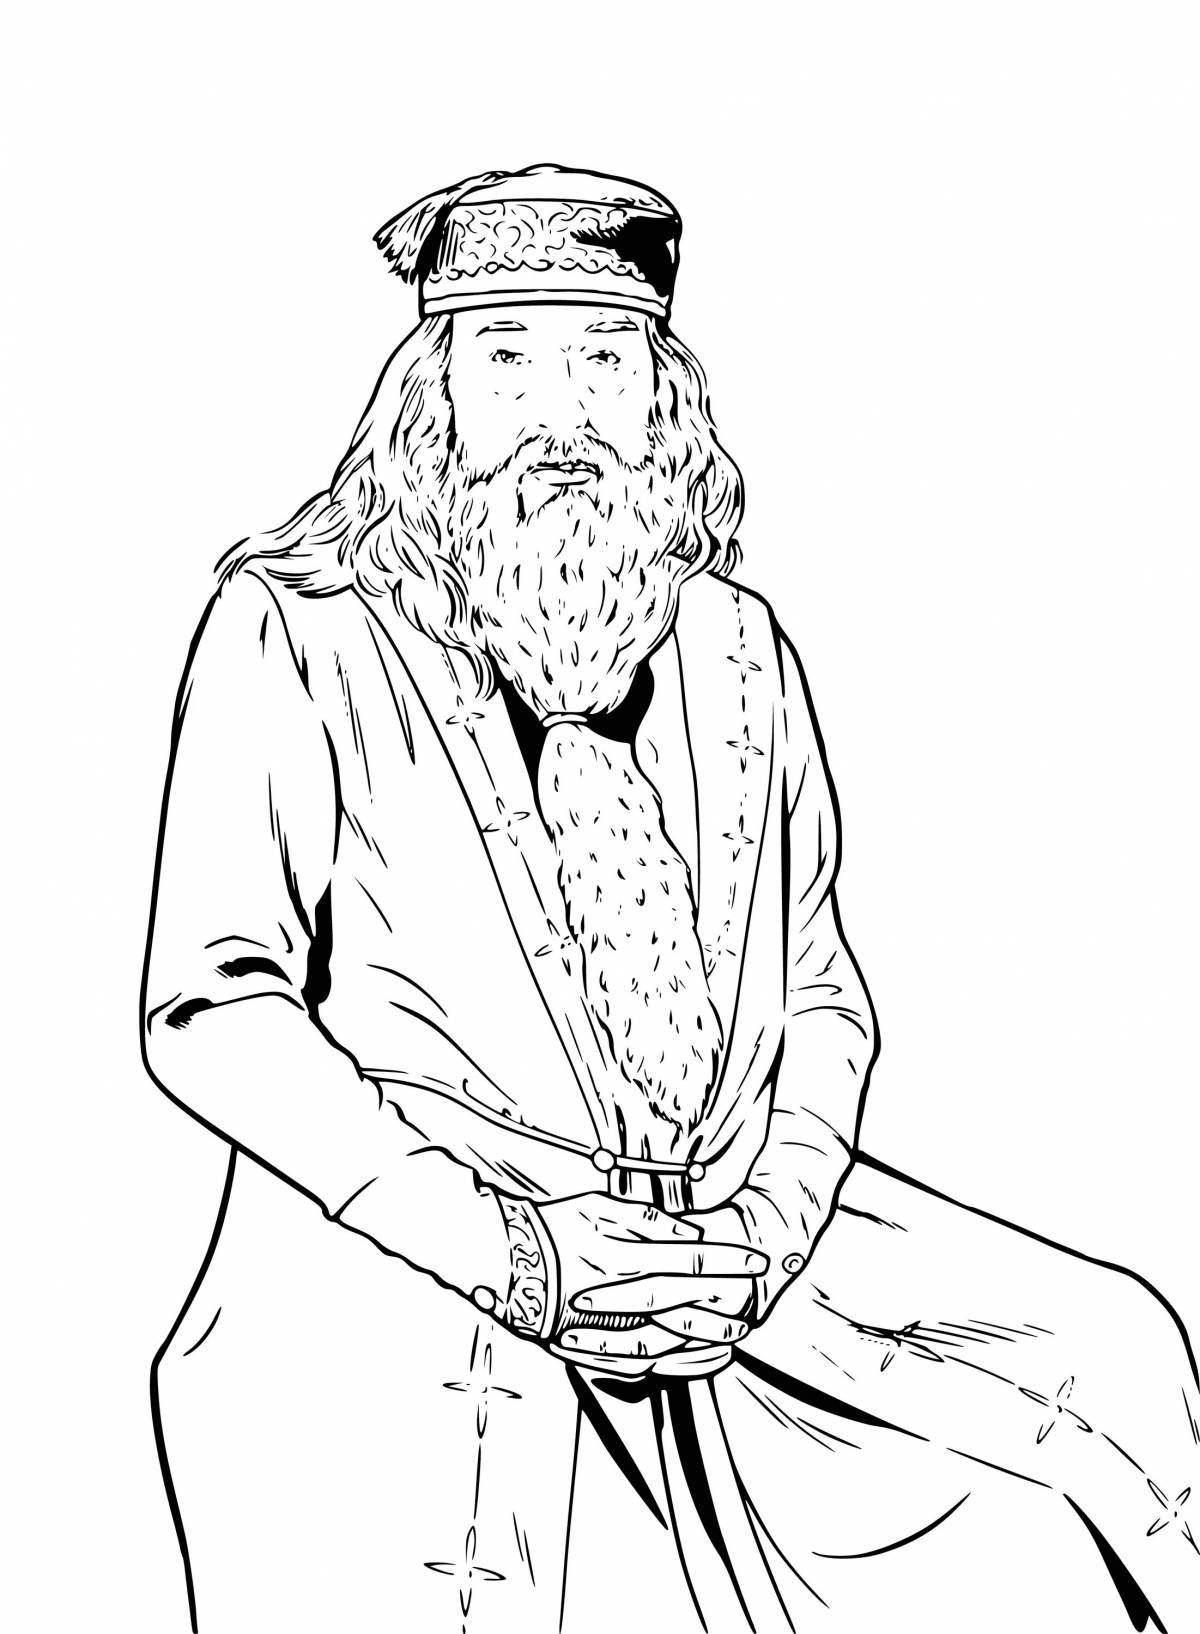 Dumbledore's awesome coloring book